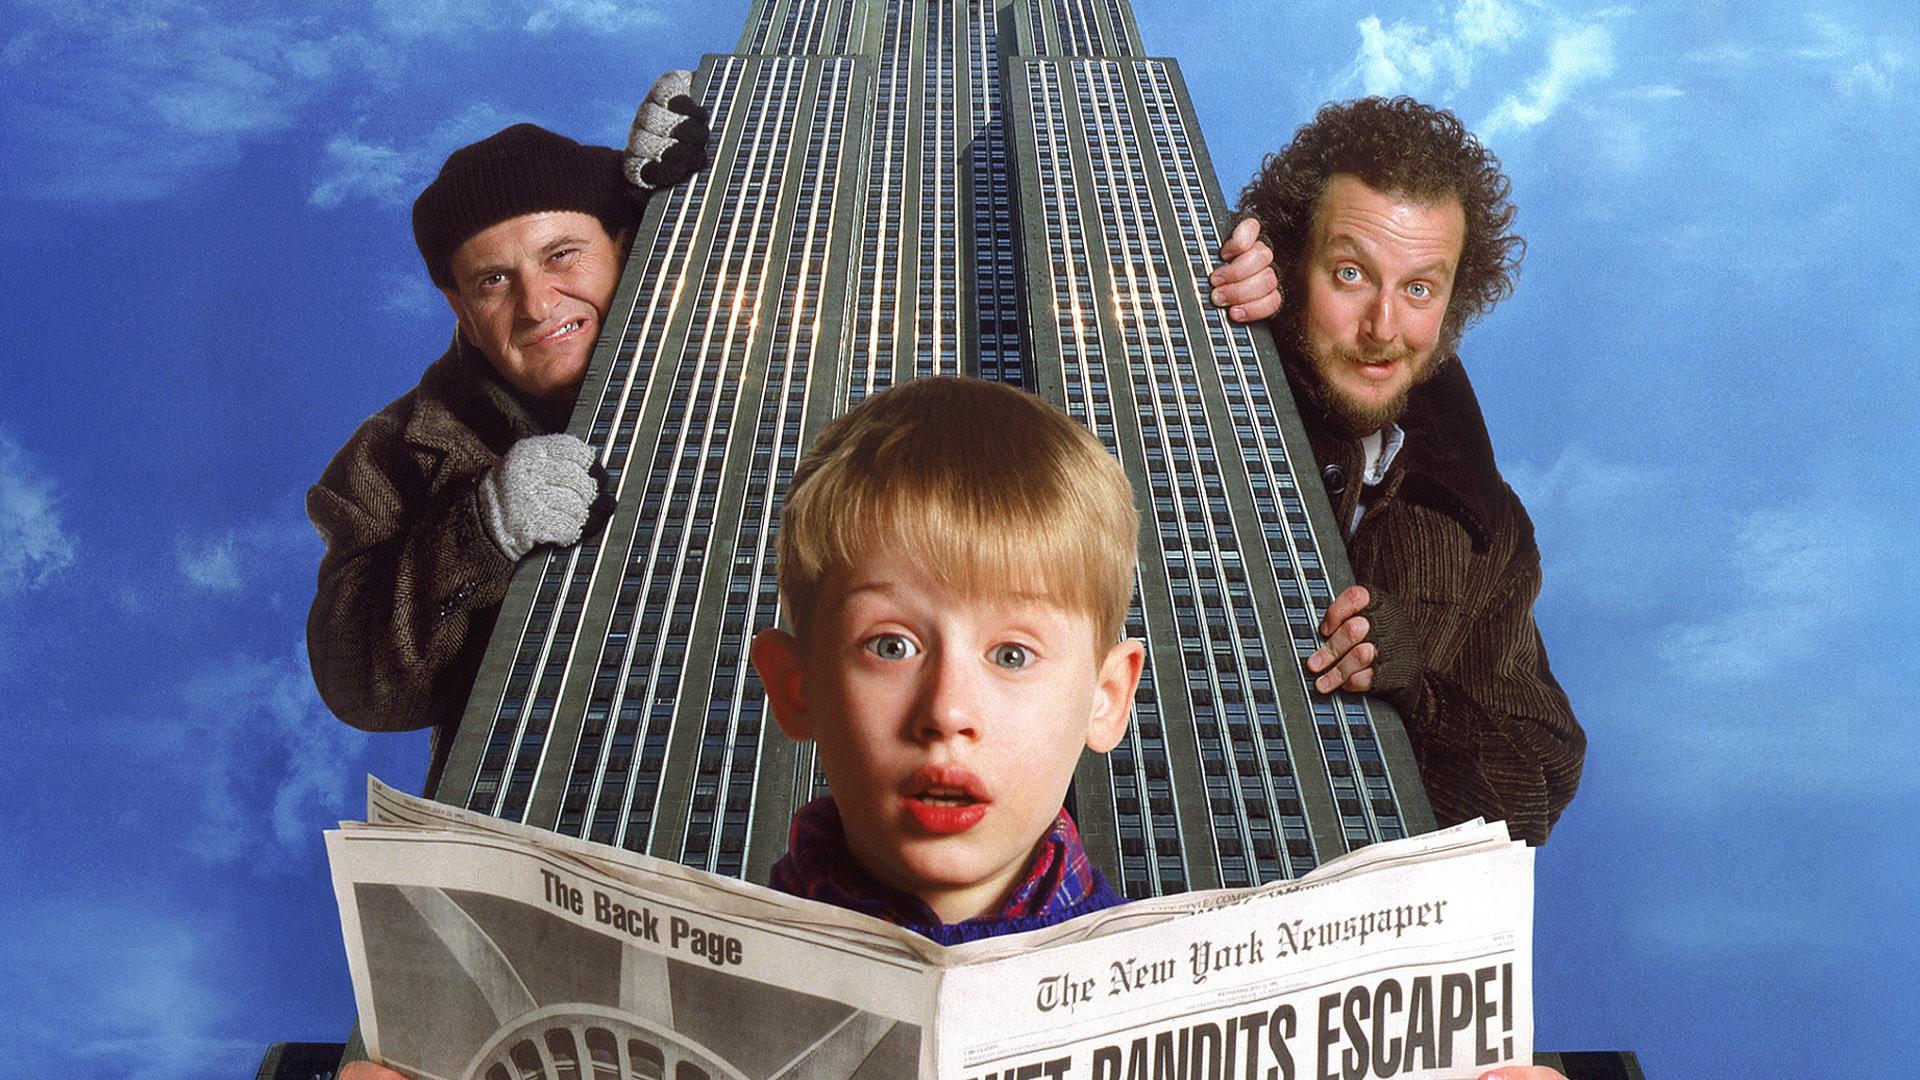 Home Alone 2 Lost In New York